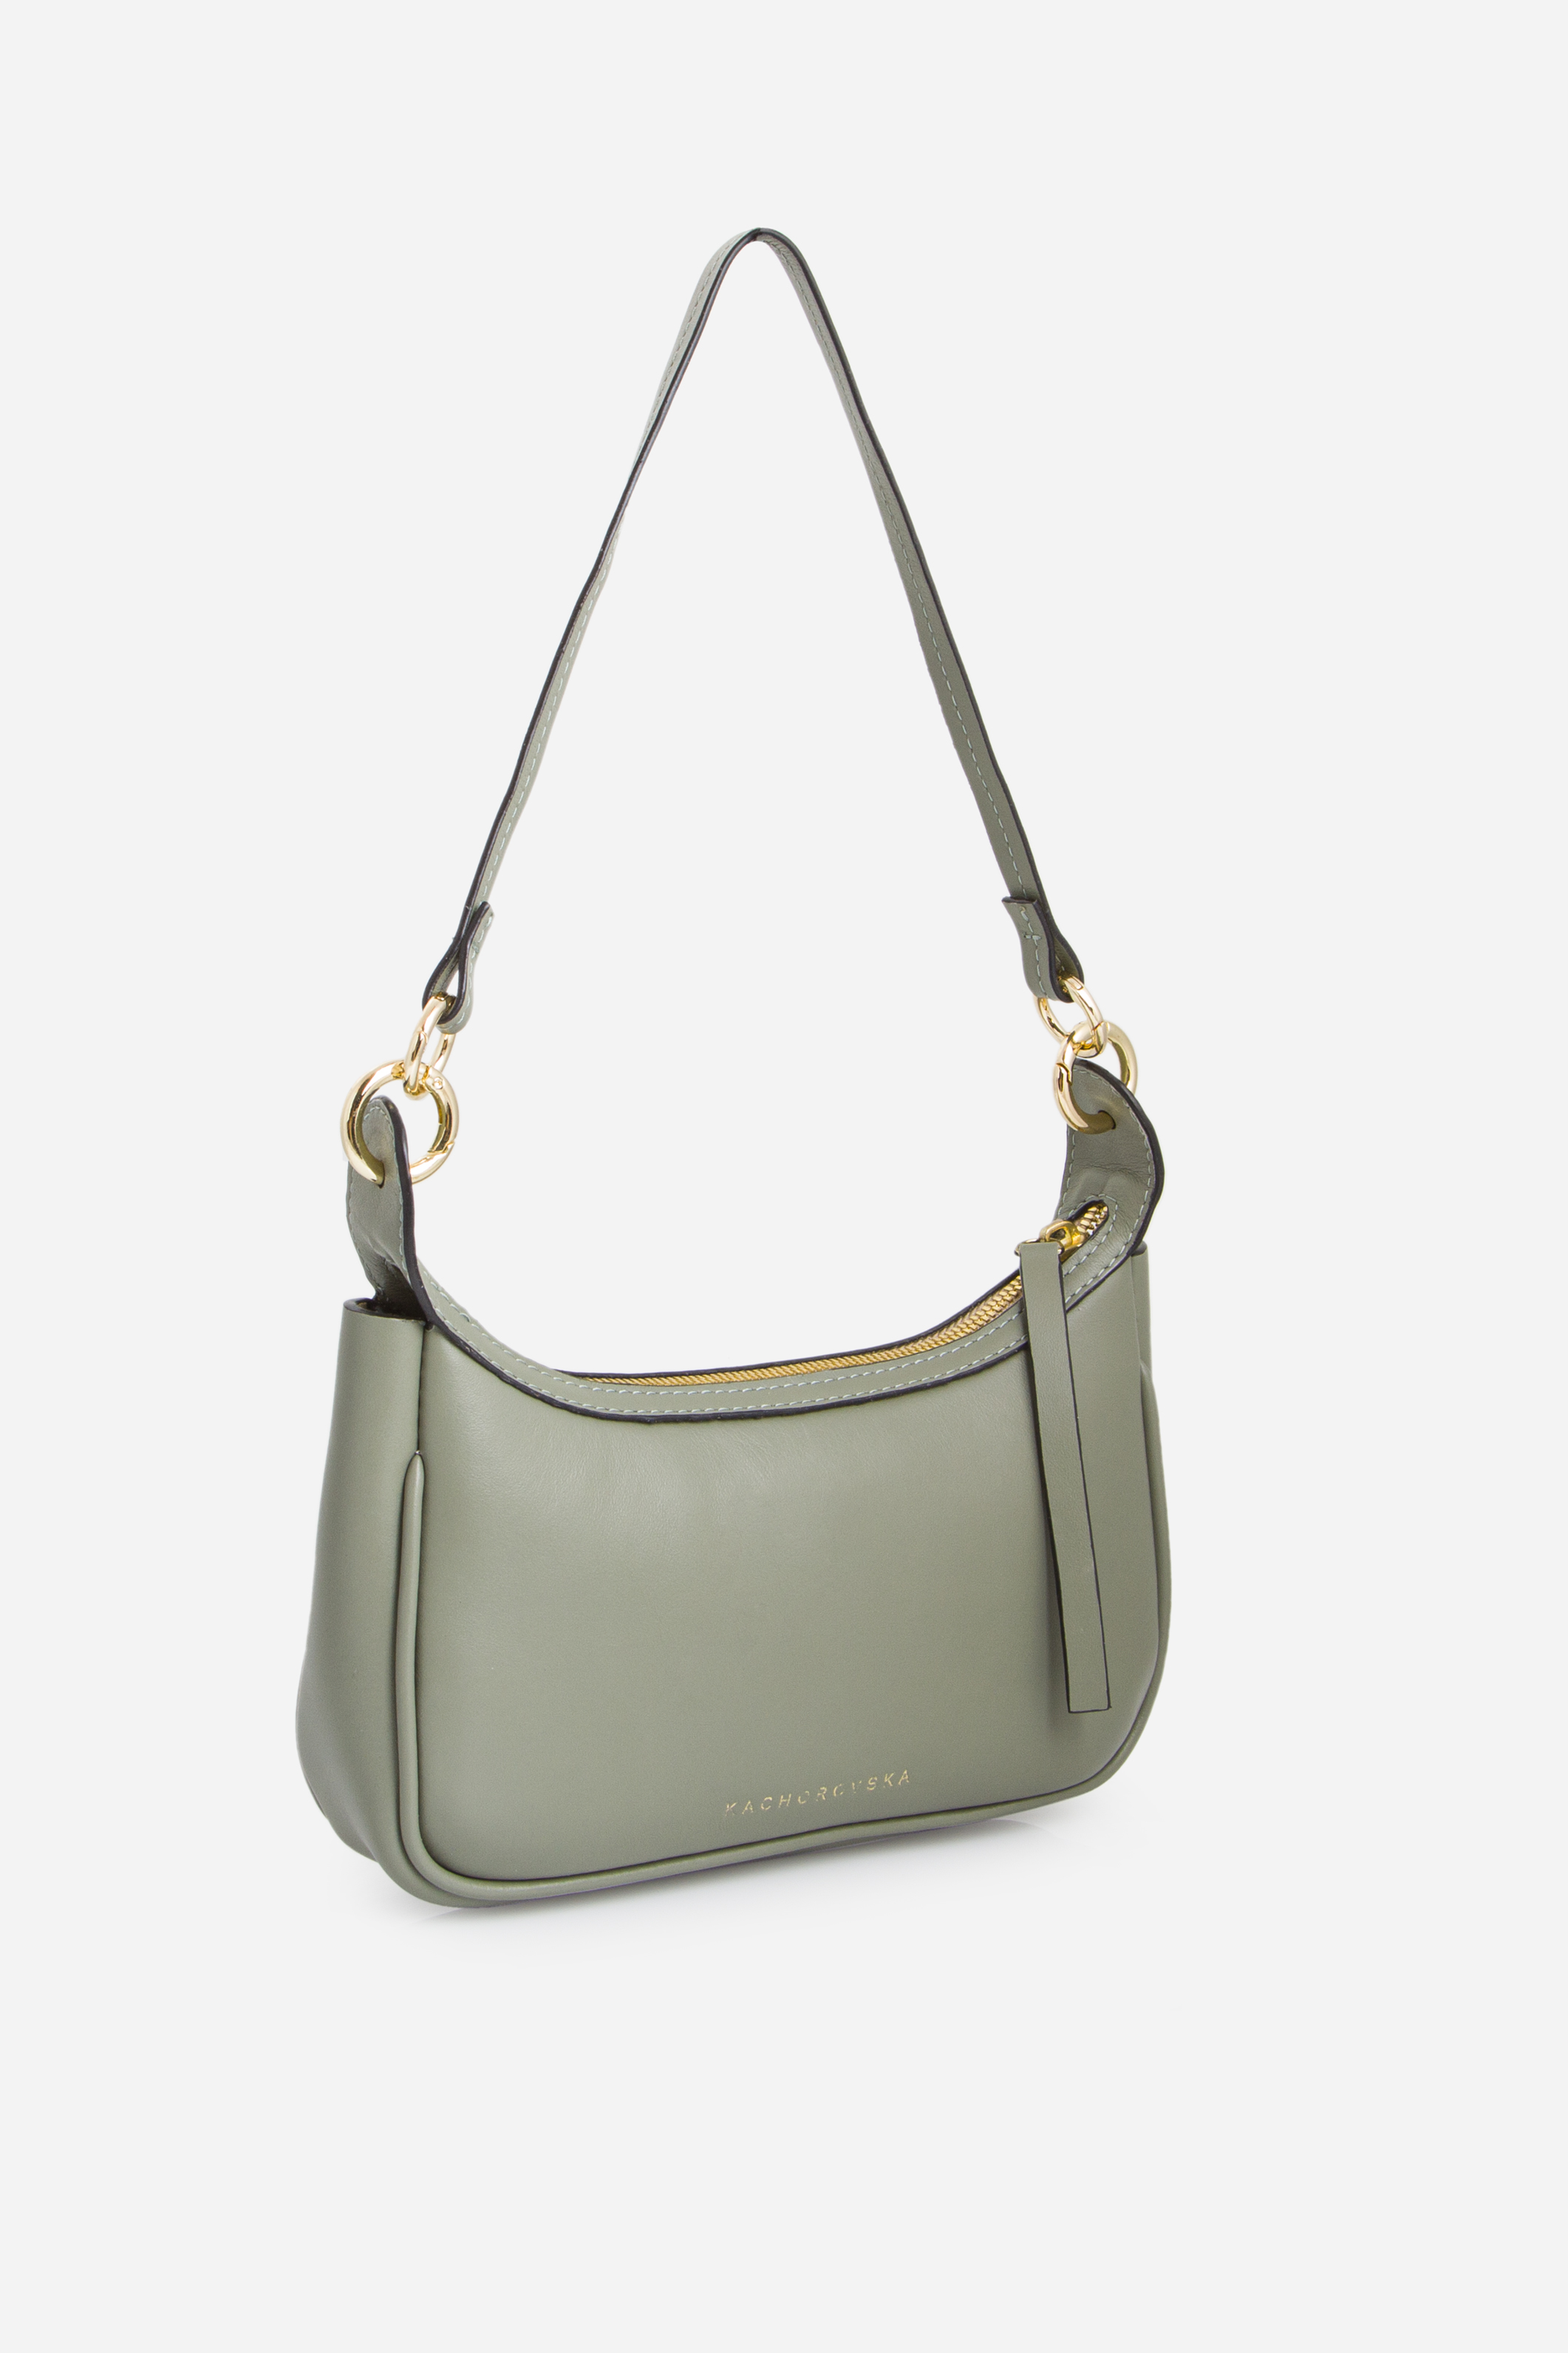 Gia green gray leather
baguette bag /gold/